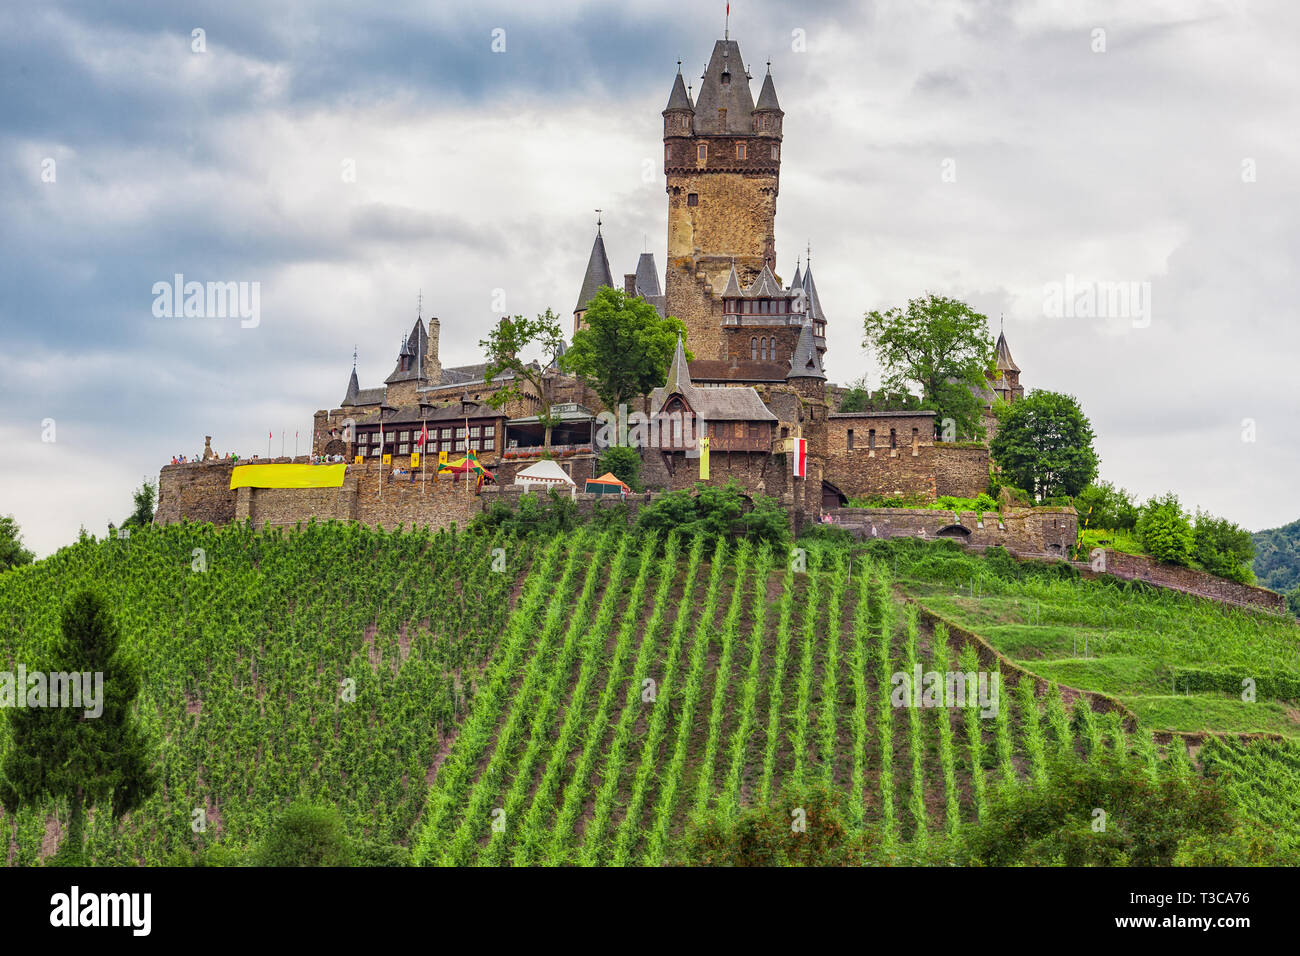 The medieval castle in Cochem, a town on the Moselle in Germany. Stock Photo